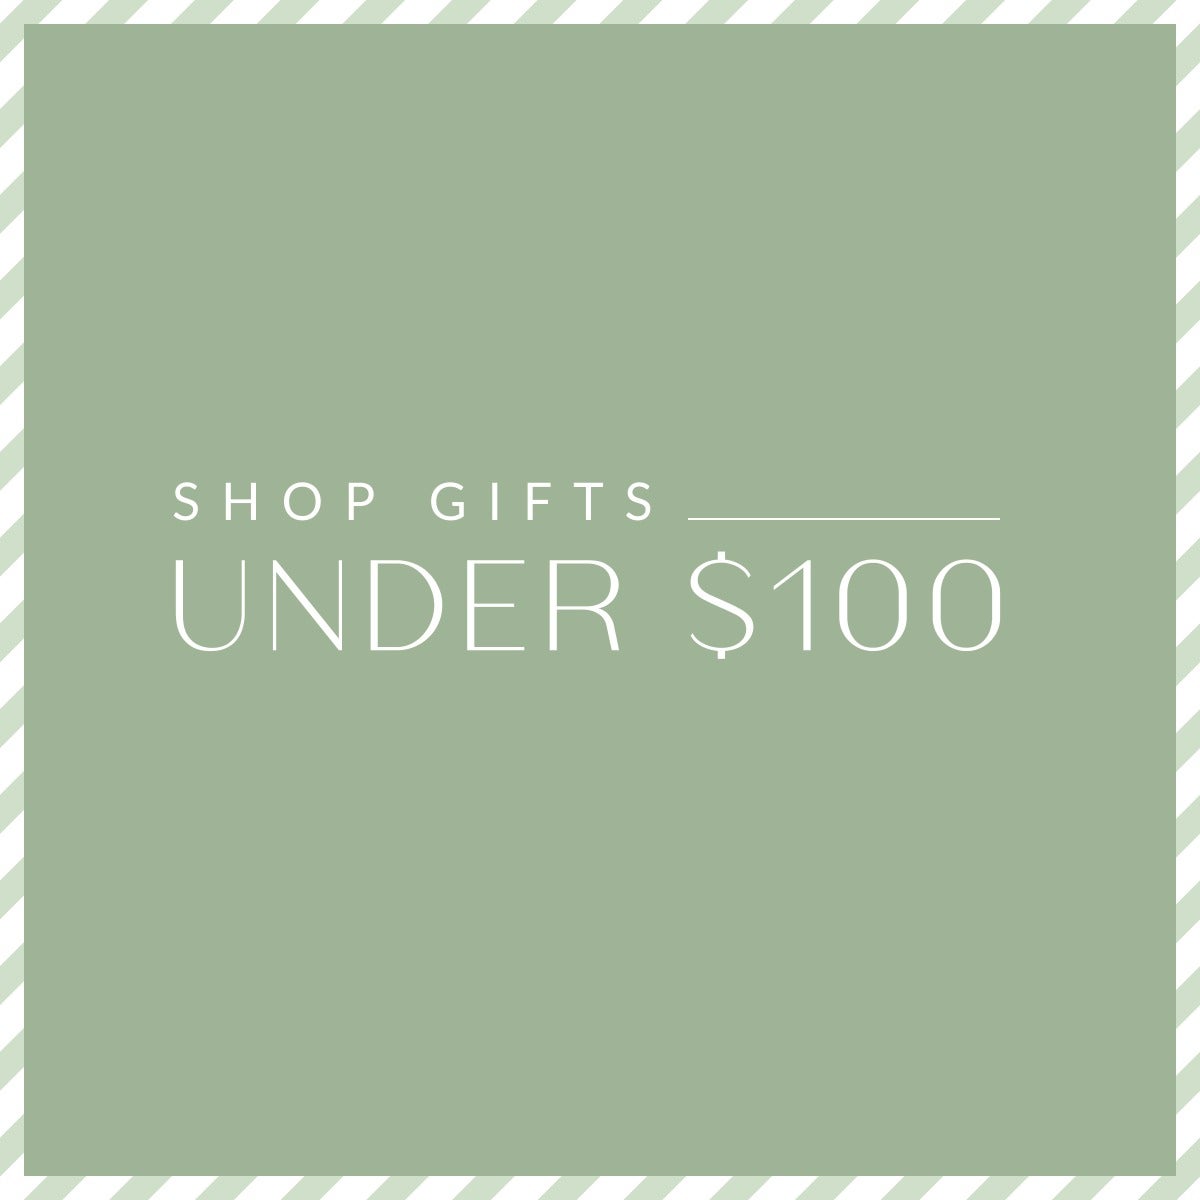 Shop Gifts Under $100 by Artifact Uprising | Cards